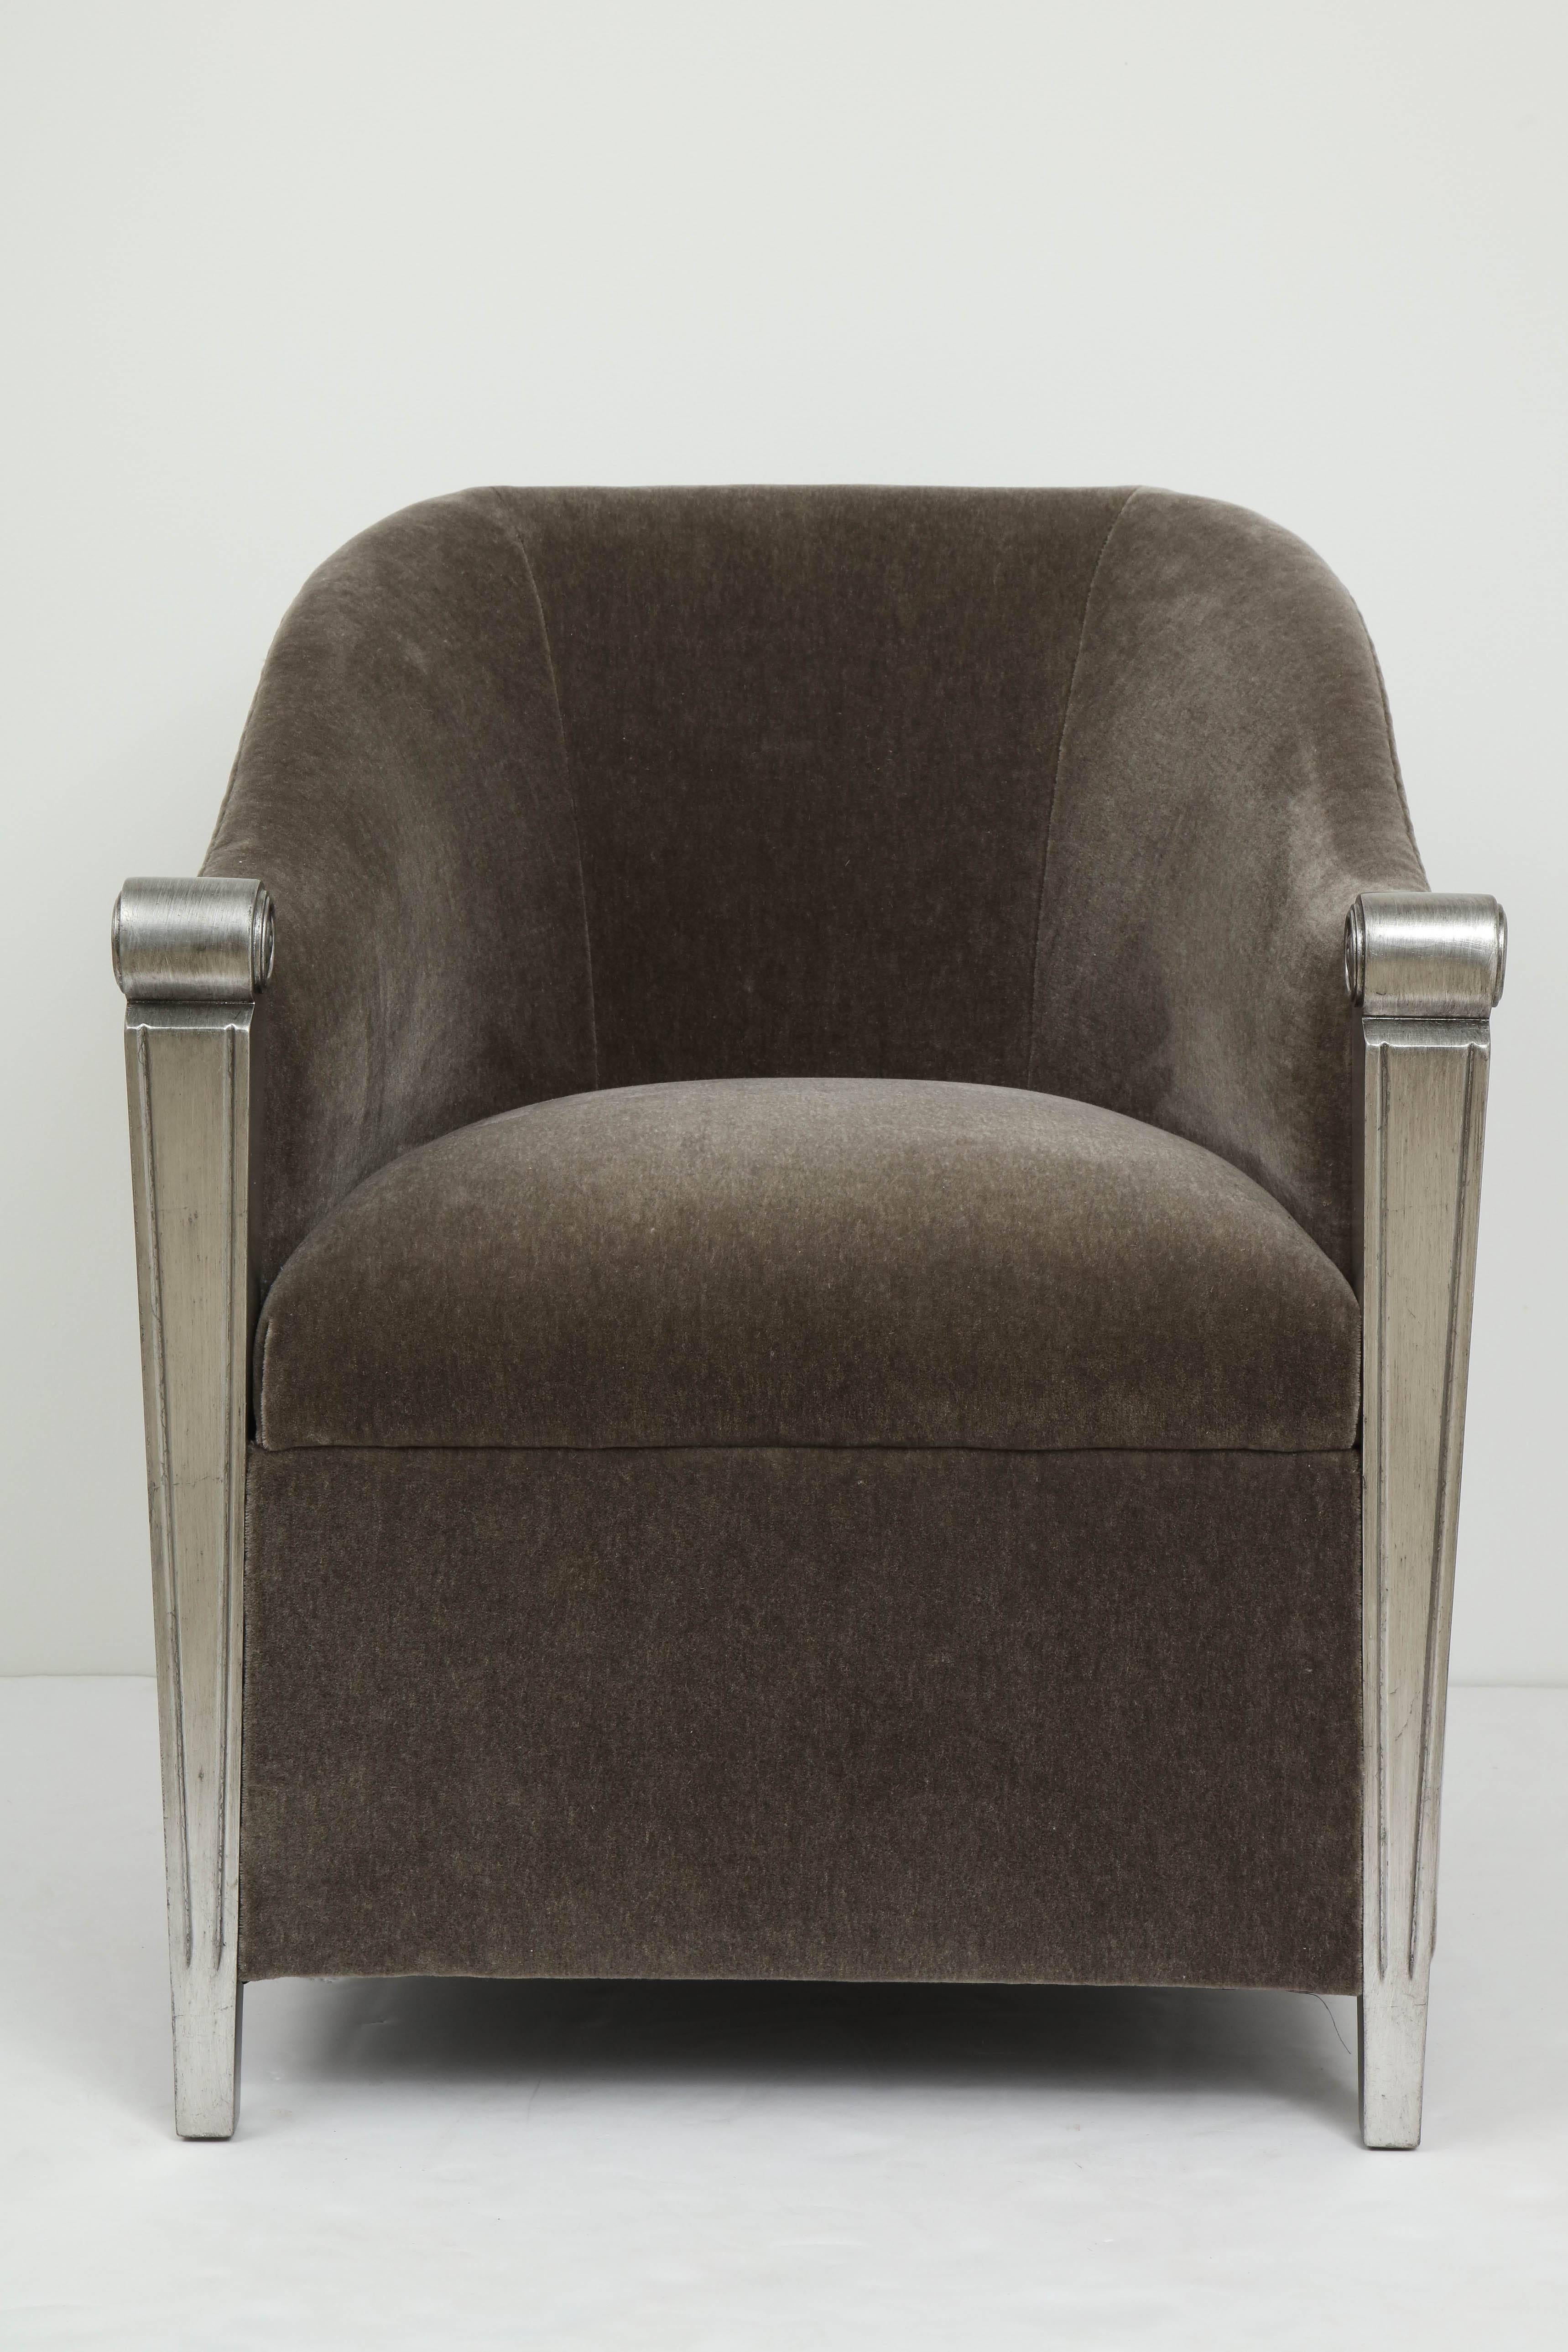 Stunning pair of aged silver leaf framed club chairs with new plush, medium grey mohair upholstery. Chairs have a barrel back silhouette and two splayed back legs. Chairs are in mint restored condition.